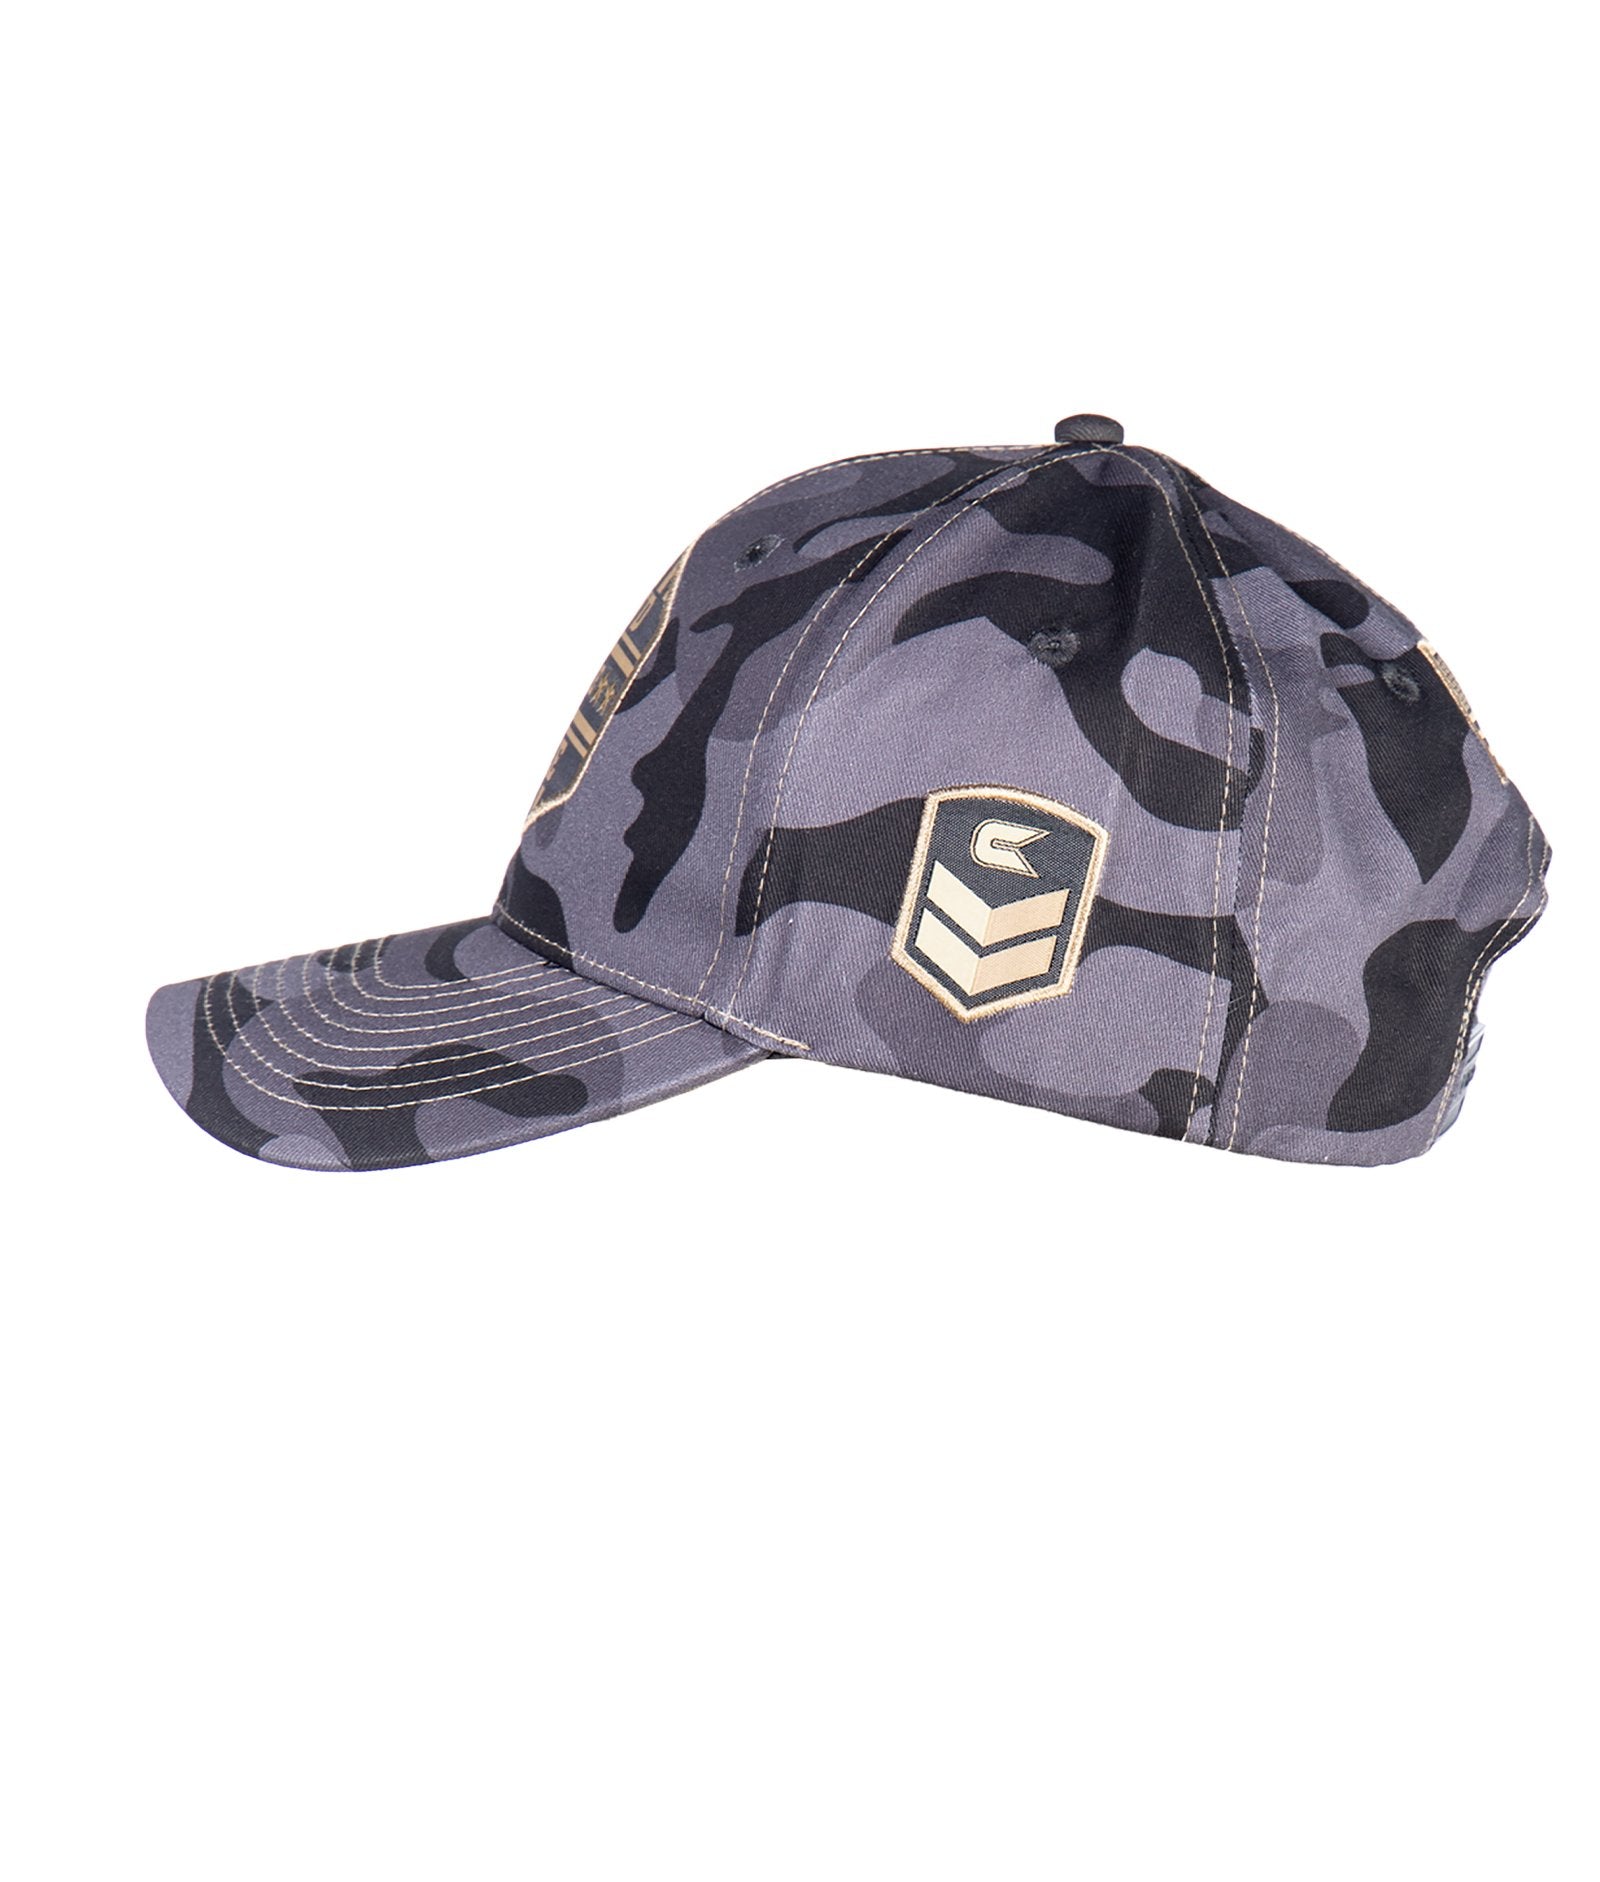 Operation Hat Trick Deep Six Constructed Adjustable Hat